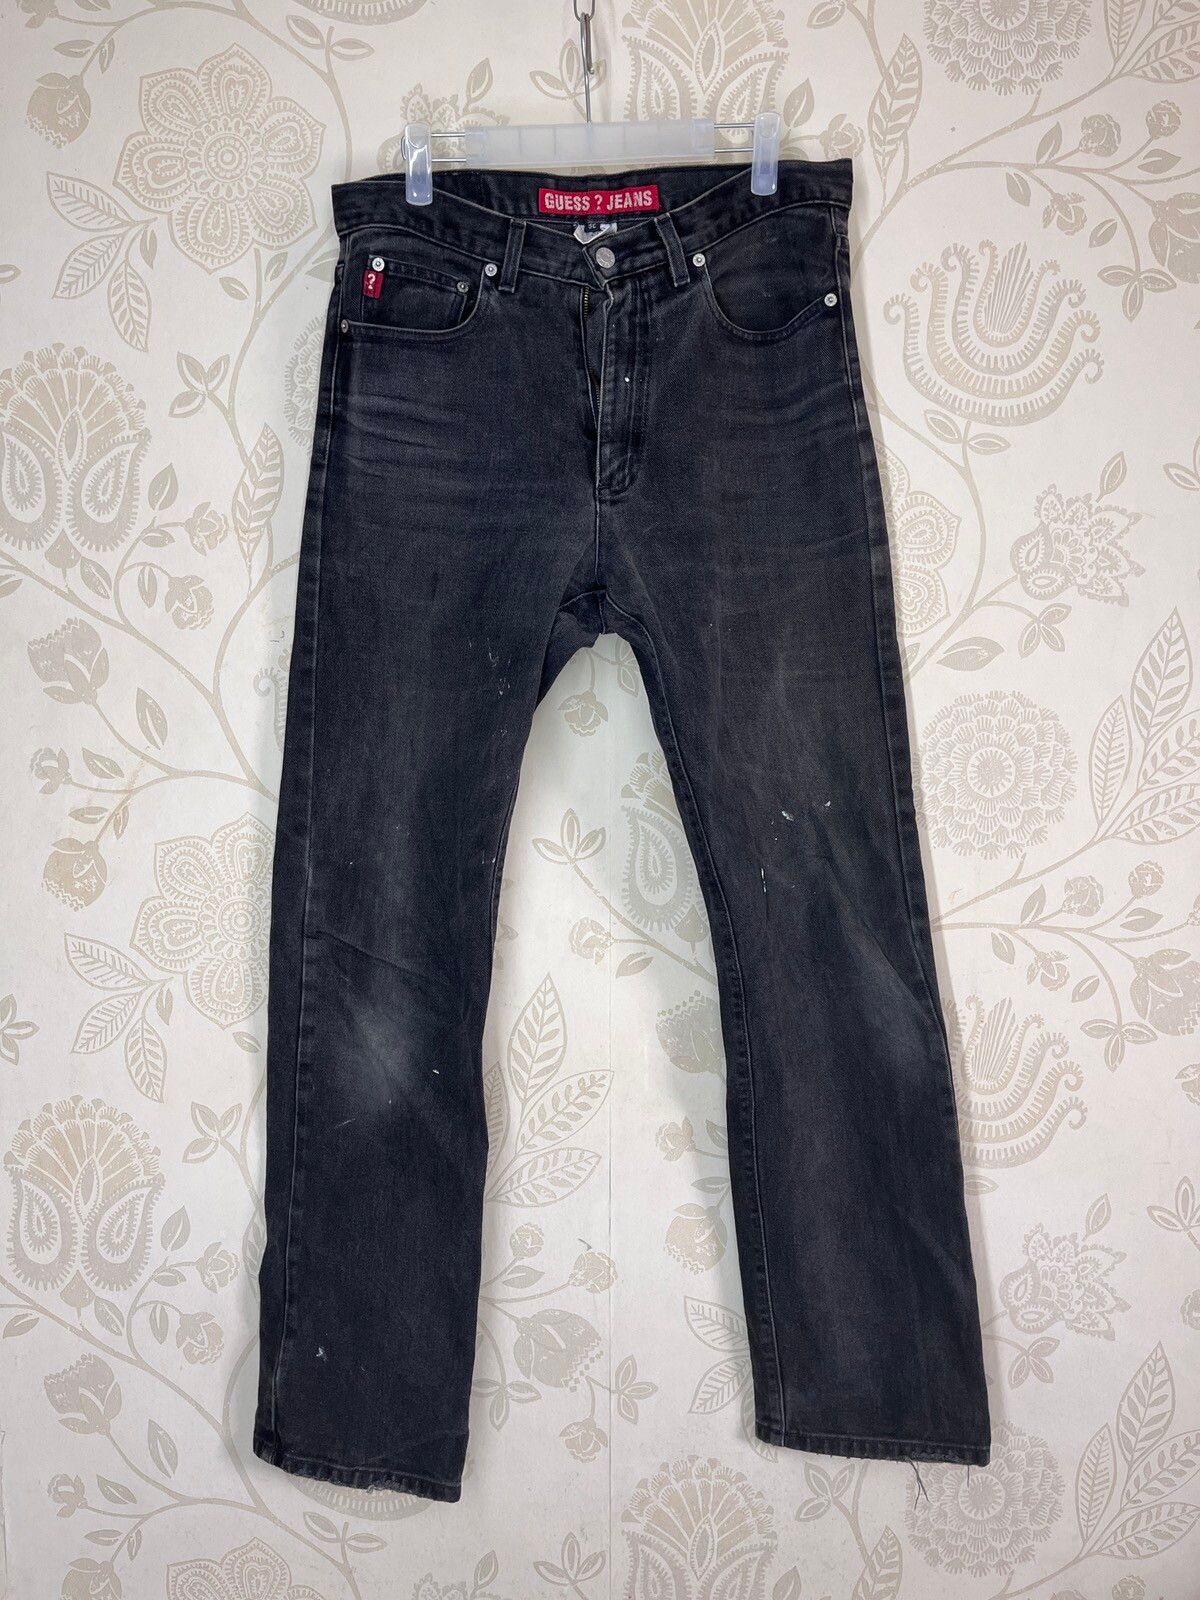 Vintage - Faded Black Guess Denim Jeans Style 39100 Made In USA - 1